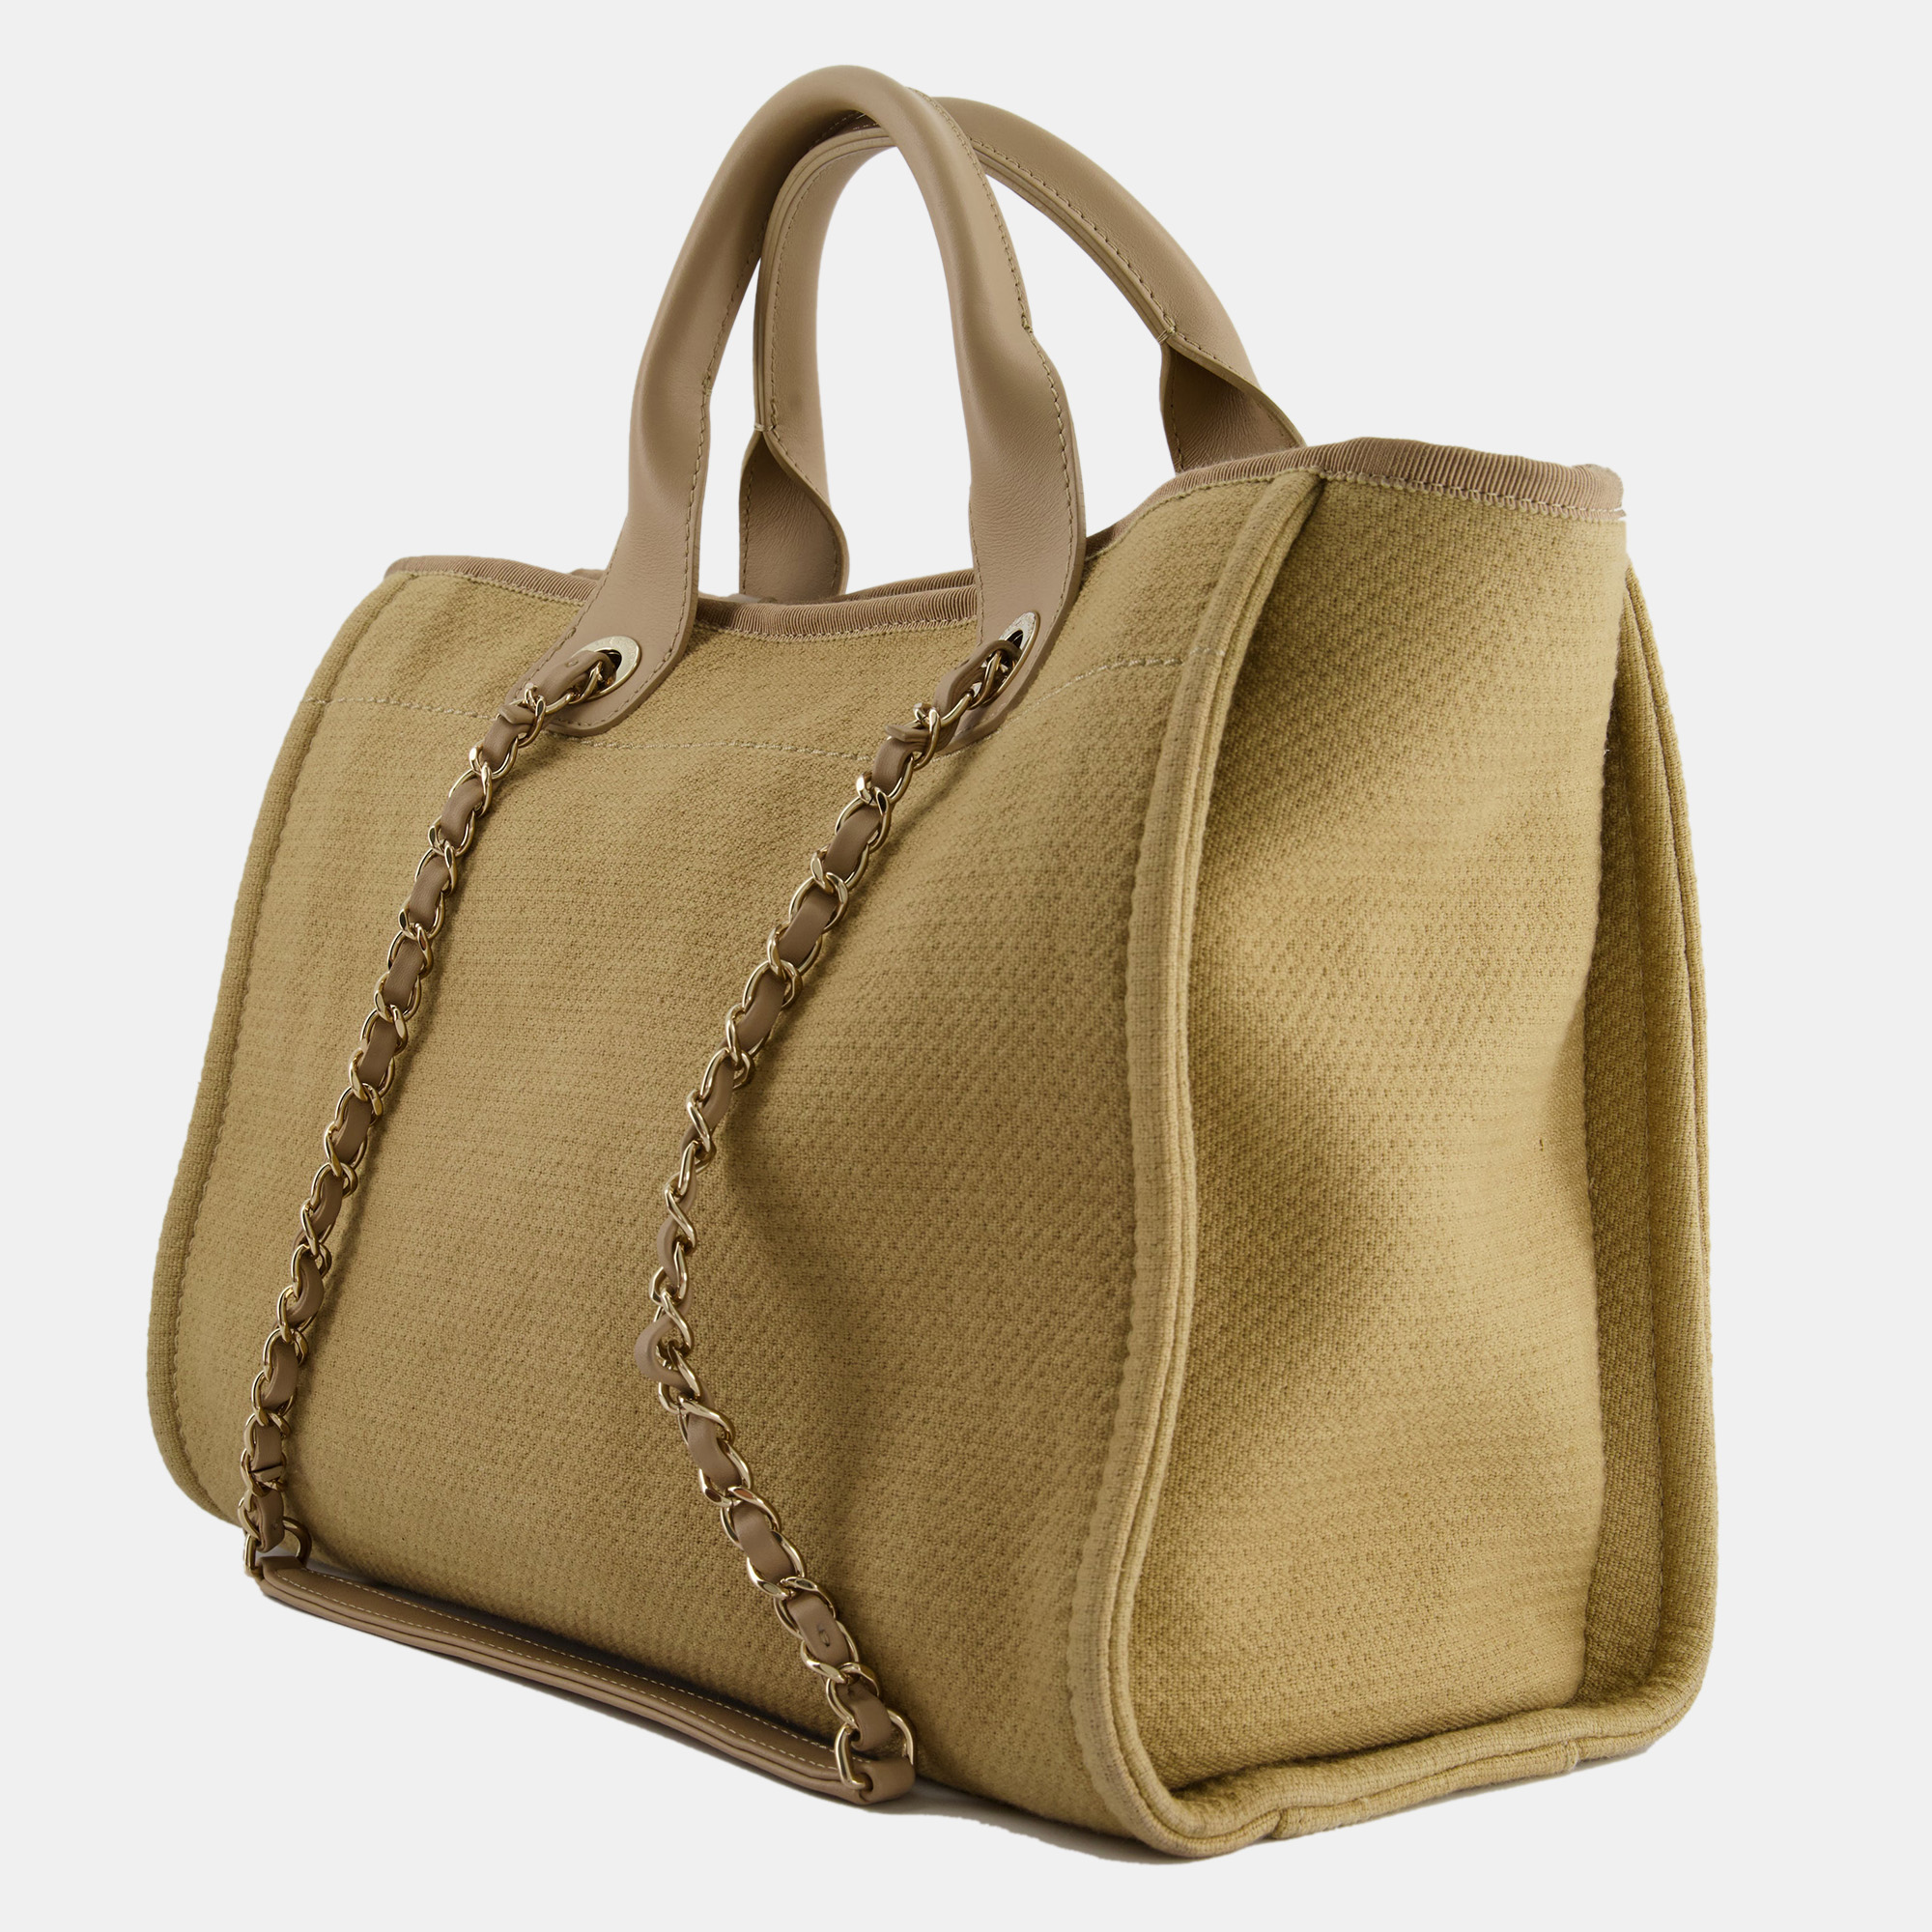 Chanel Dark Beige Canvas Small Deauville Tote Bag With CC Logo Print And Champagne Gold Hardware